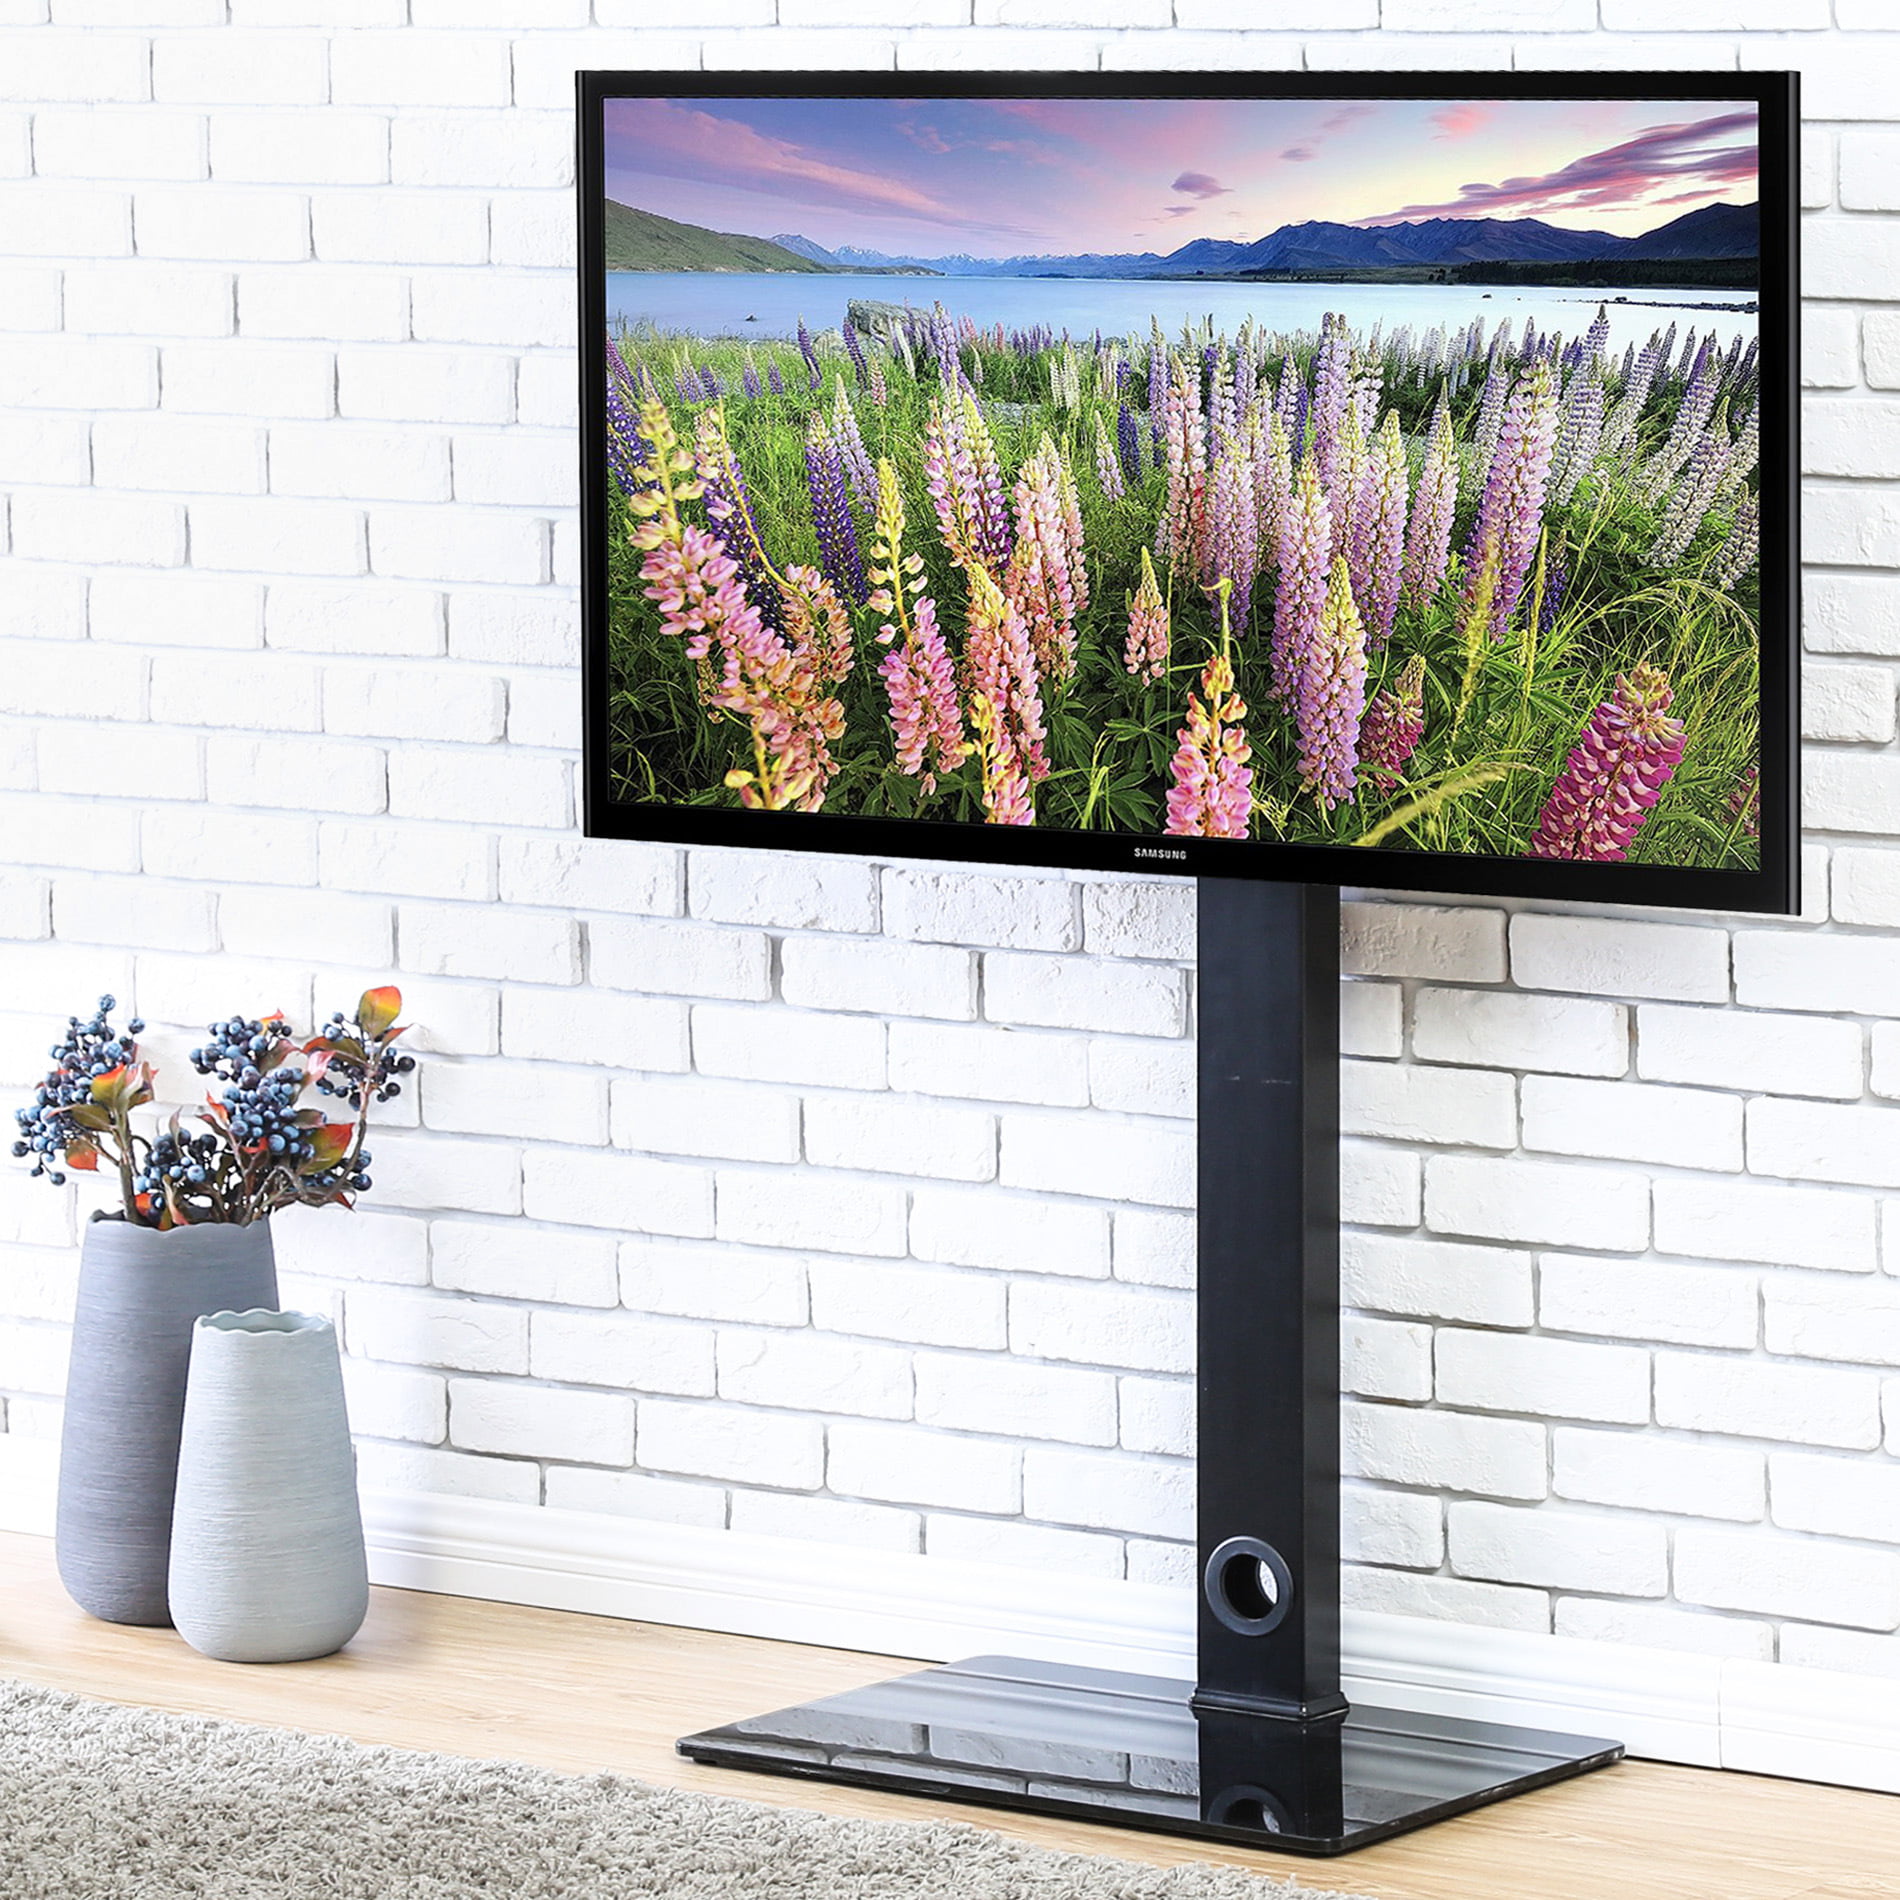 FITUEYES Universal Floor TV Stand with Swivel Mount, For ...